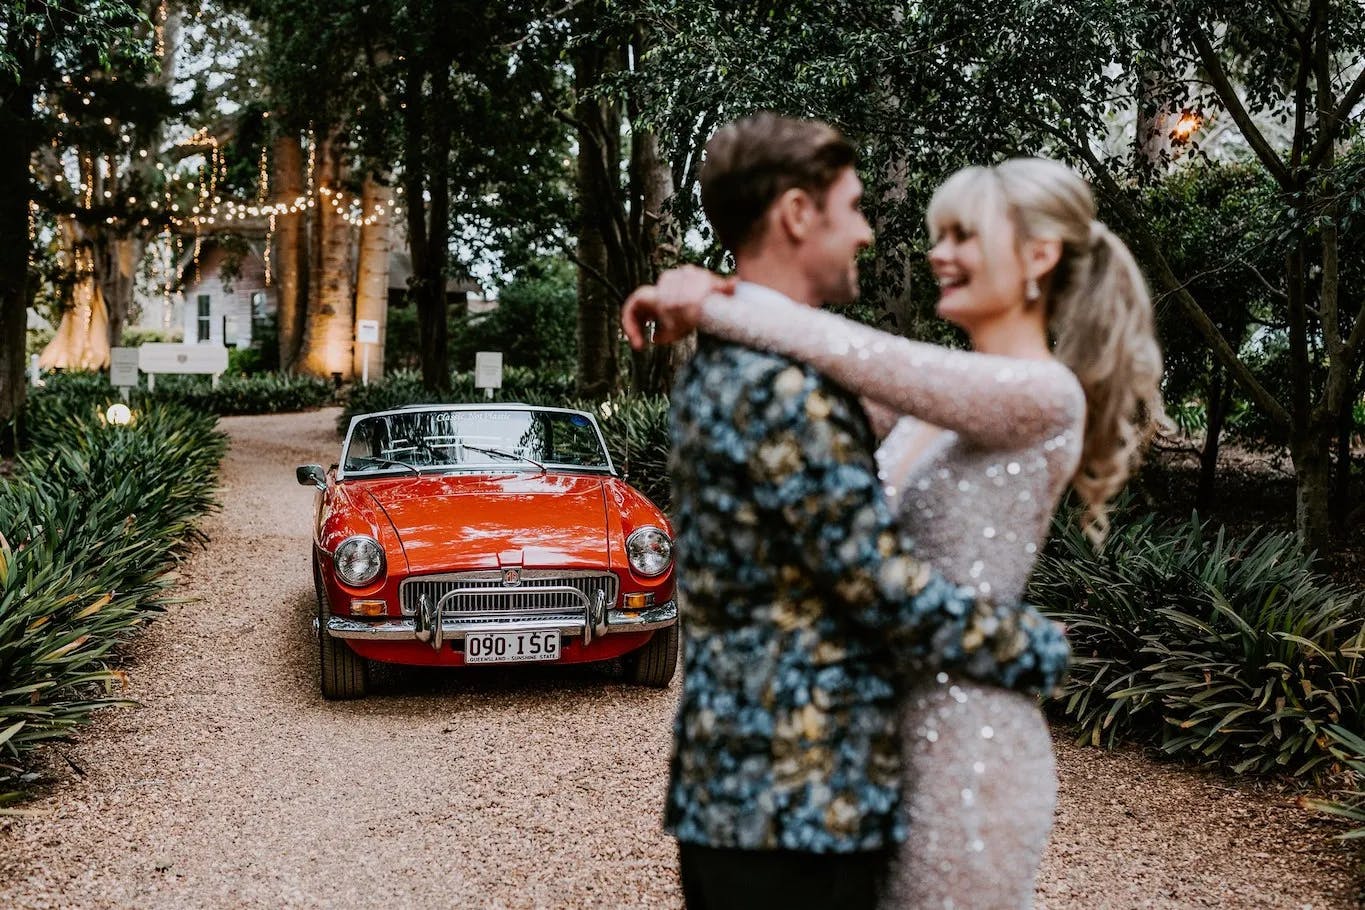 A couple in formal attire is happily embracing with a classic red car in the background. The car is parked on a gravel path lined with greenery, and fairy lights are strung between trees, creating a romantic atmosphere. The image is slightly blurred, focusing on the couple.